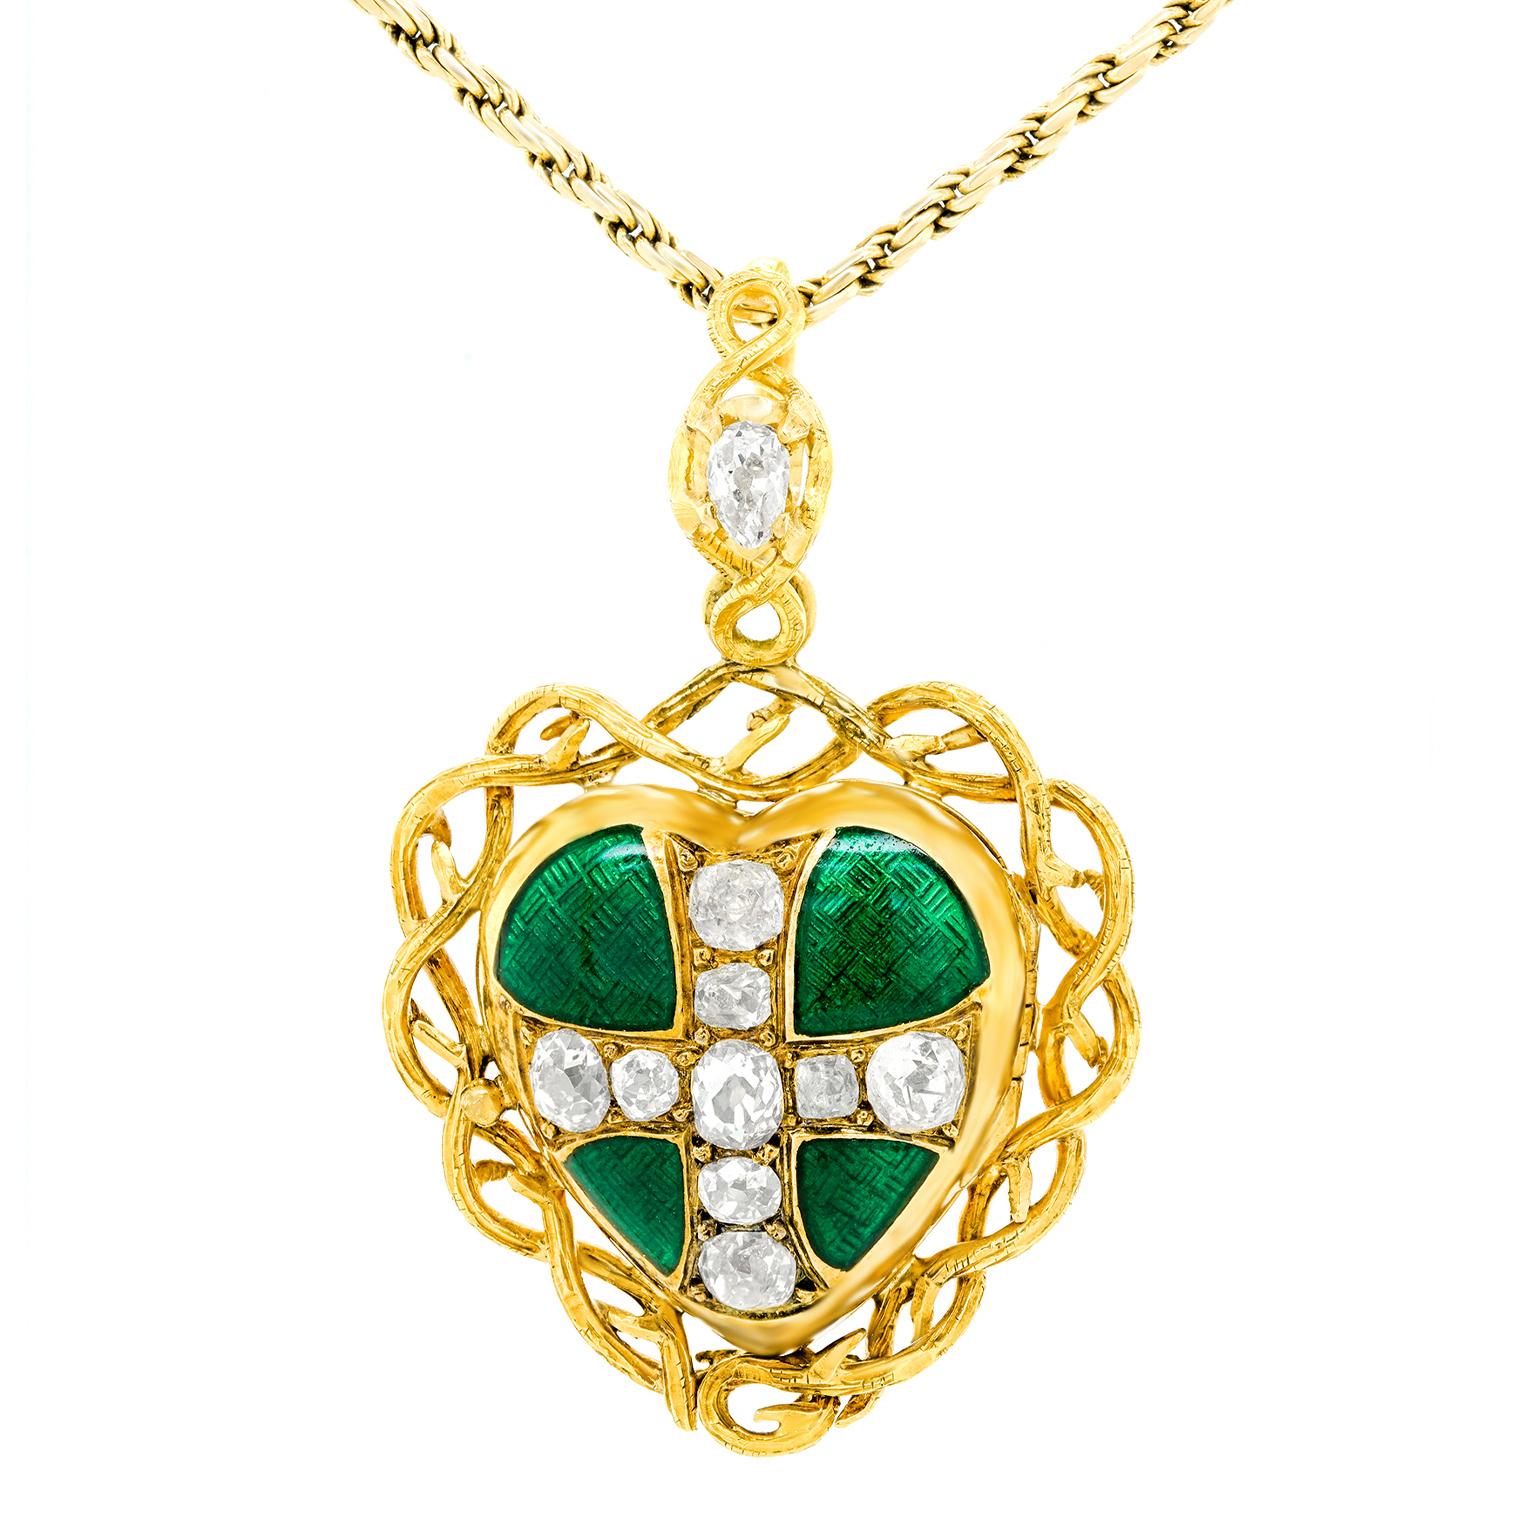 Brilliant Cut Gothic Revival Diamond and Enamel Gold Heart Pendant, French, 1870